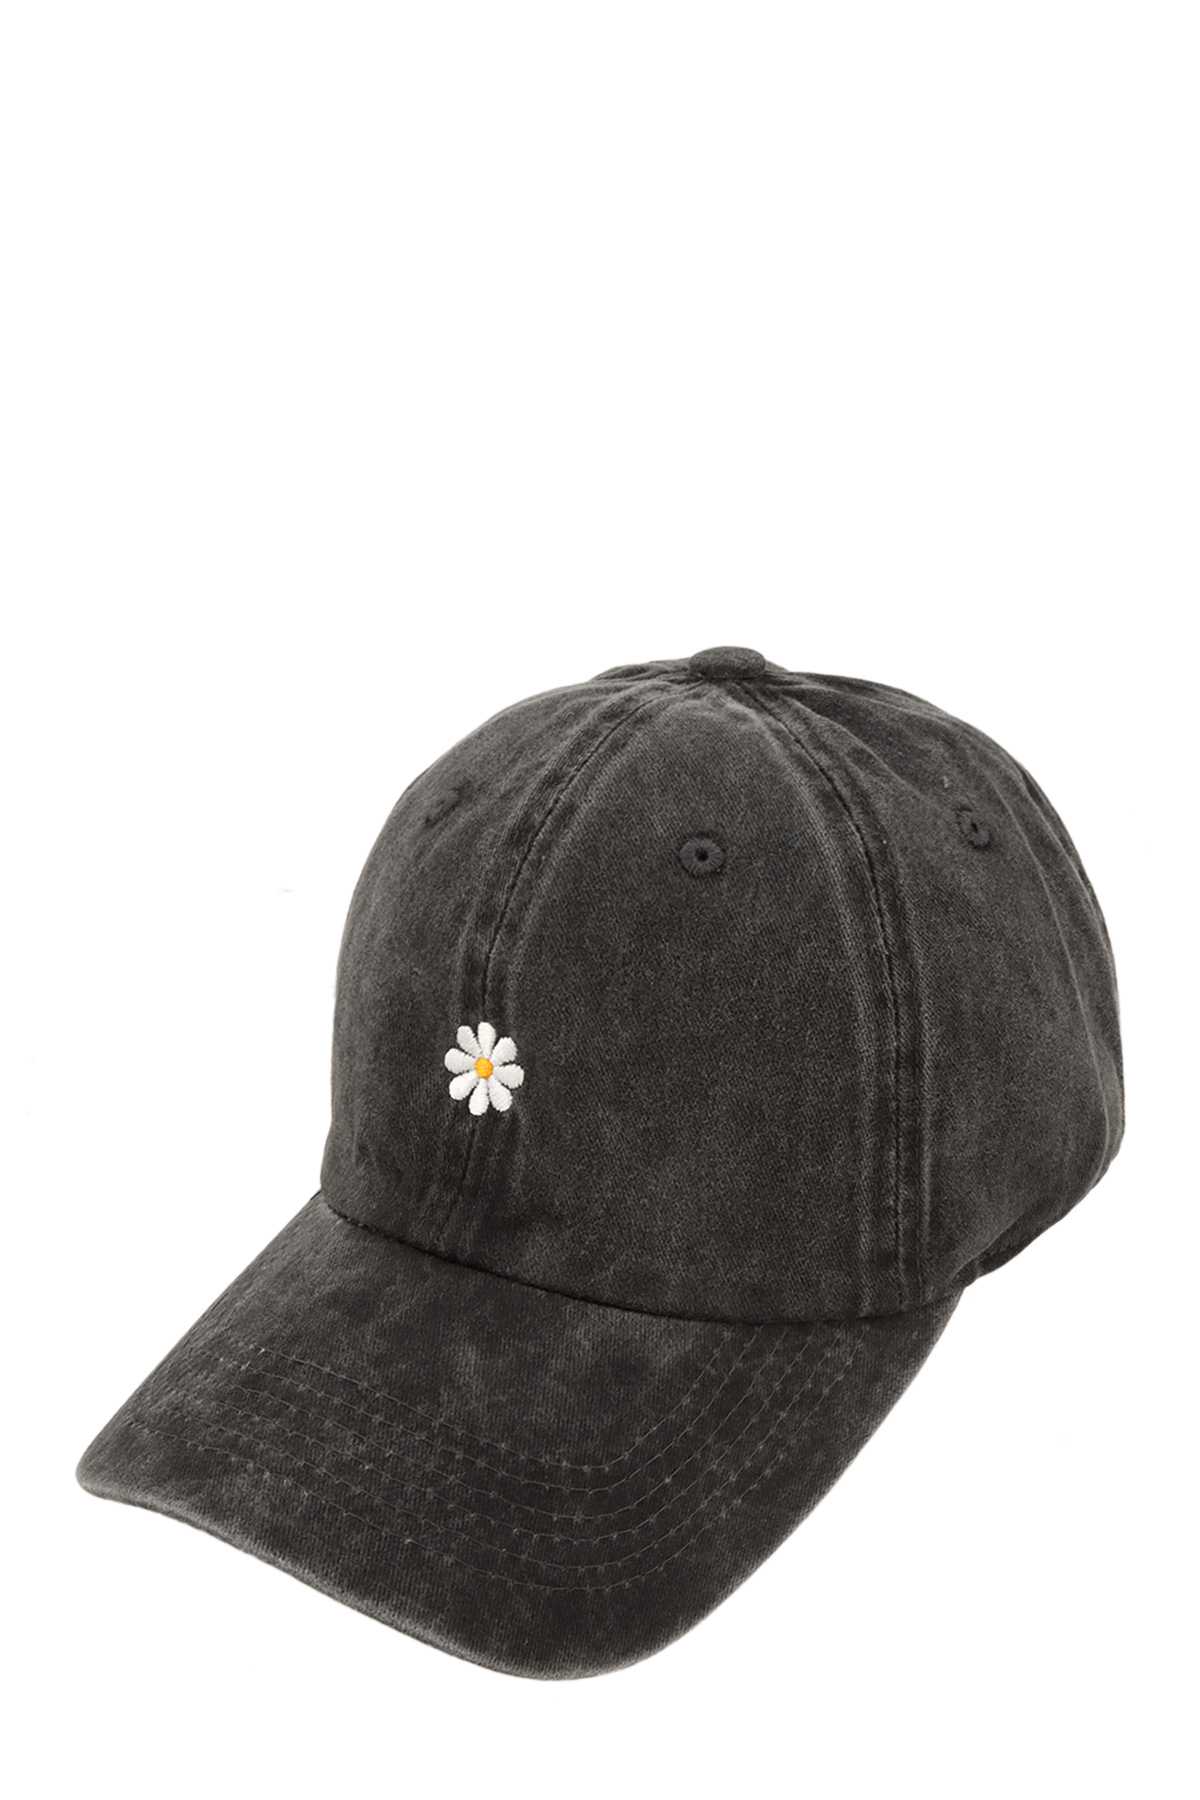 Daisy Embroidery Pigment Cap